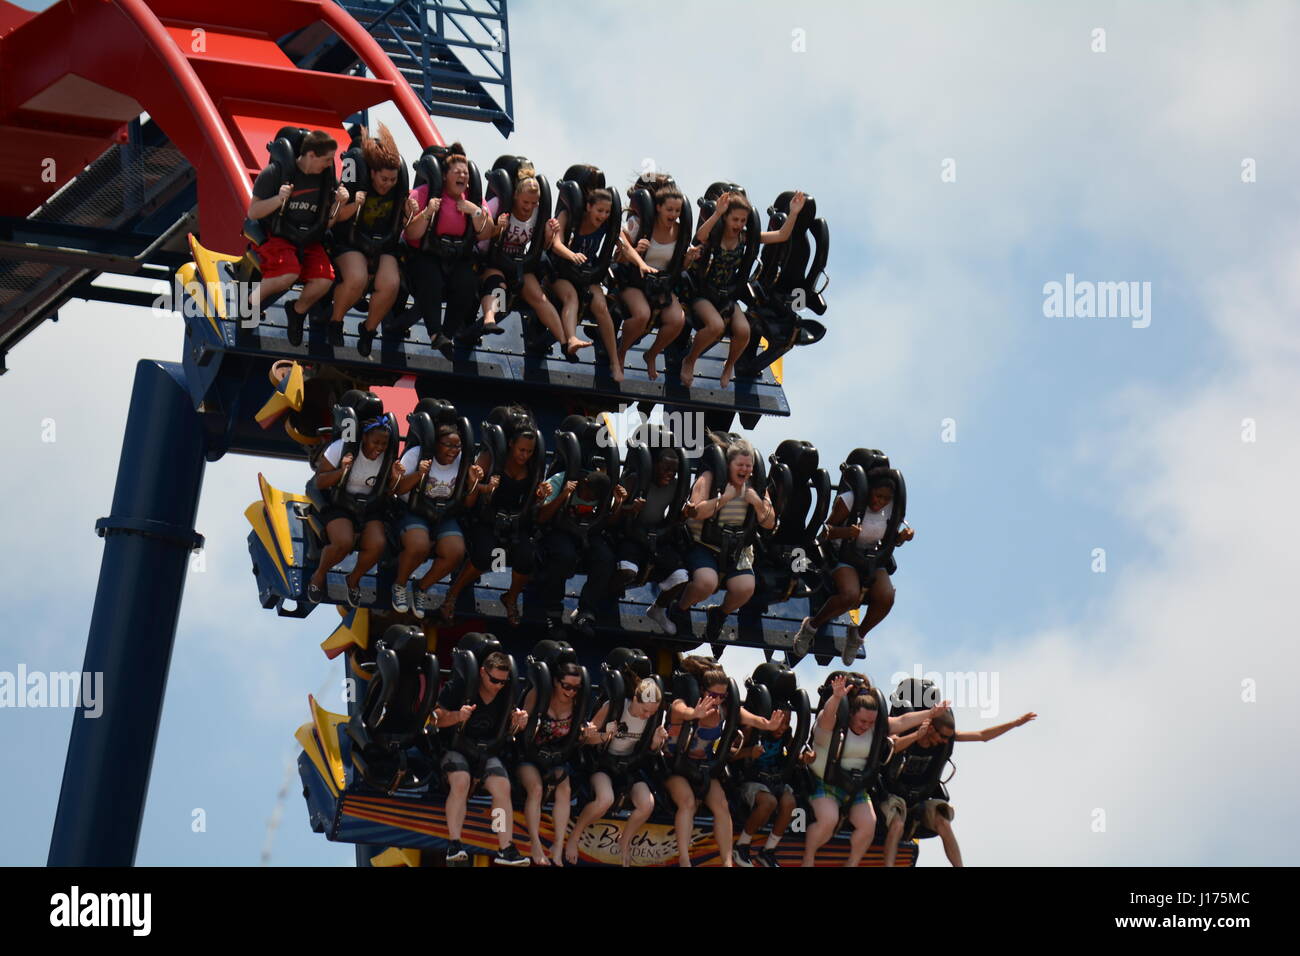 theme park roller coasters full of people wild faces screaming Stock Photo